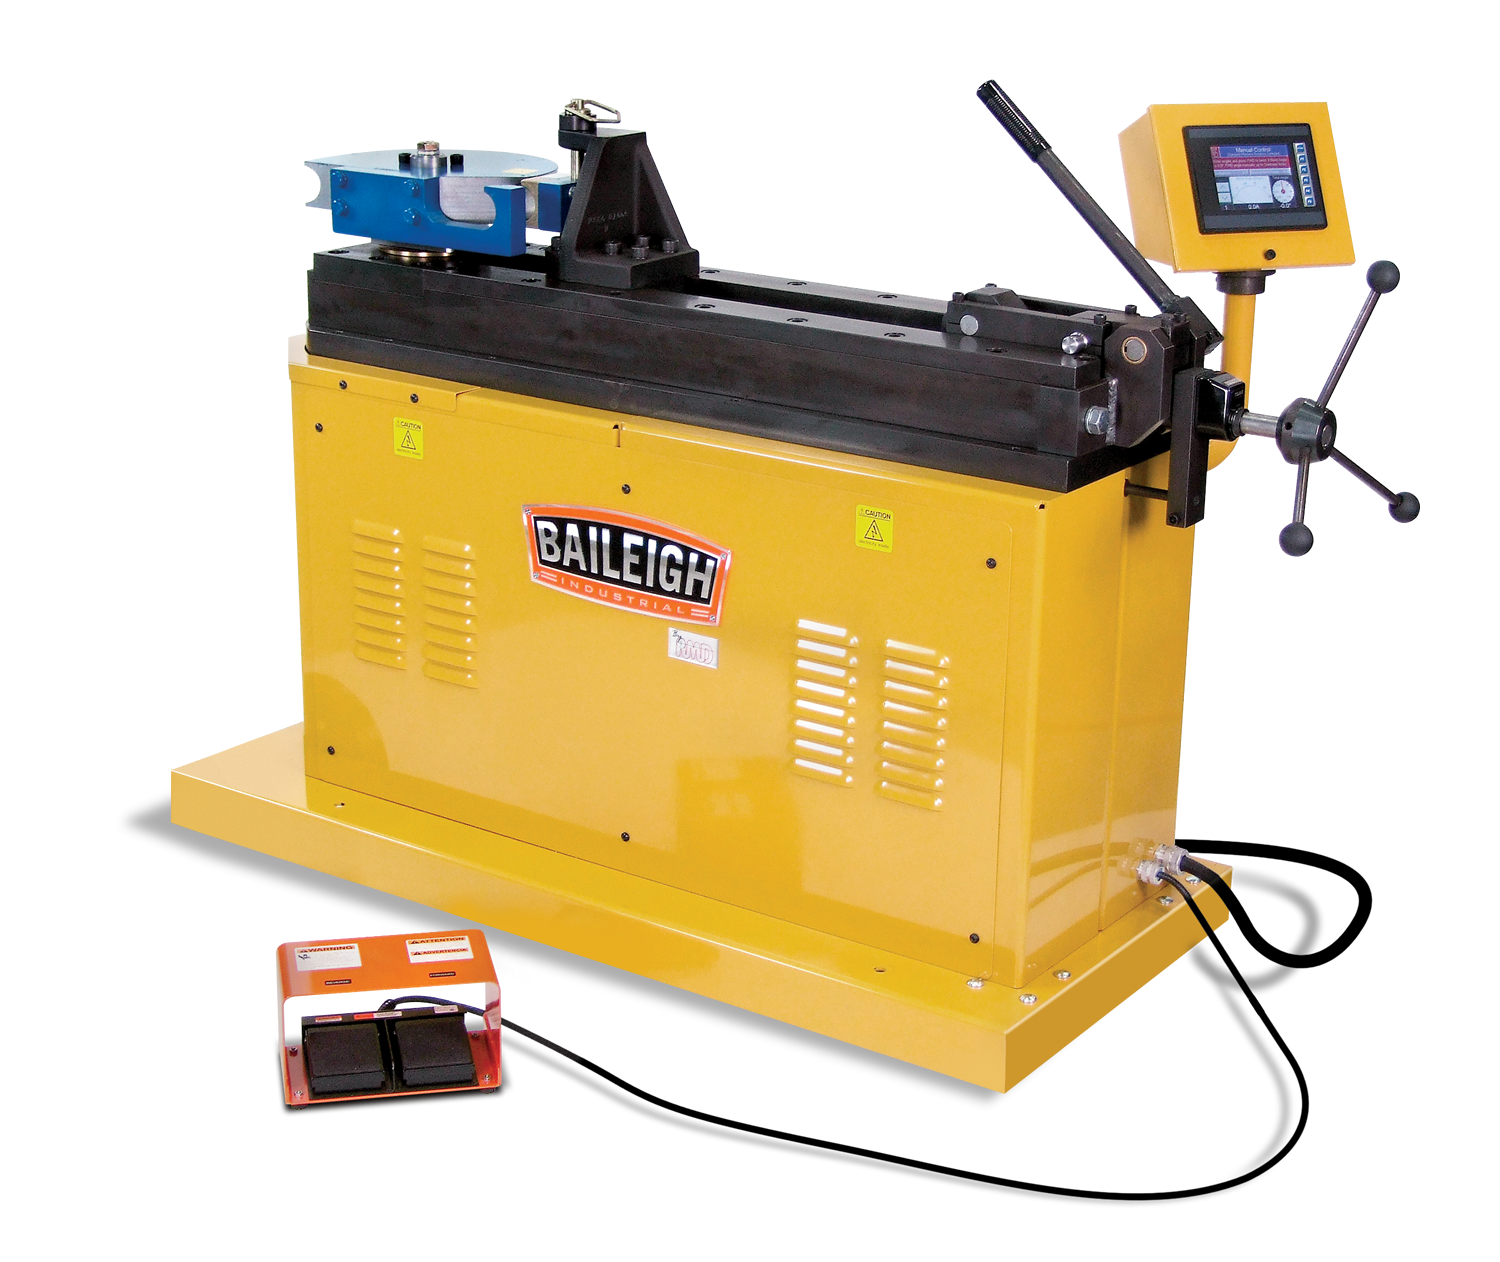 Baileigh RDB-350-TS 220V 3 Phase Rotary Draw Bender w/ 170 Job Touch Screen Programmer, 2.5" Schedule 40 Pipe Capacity